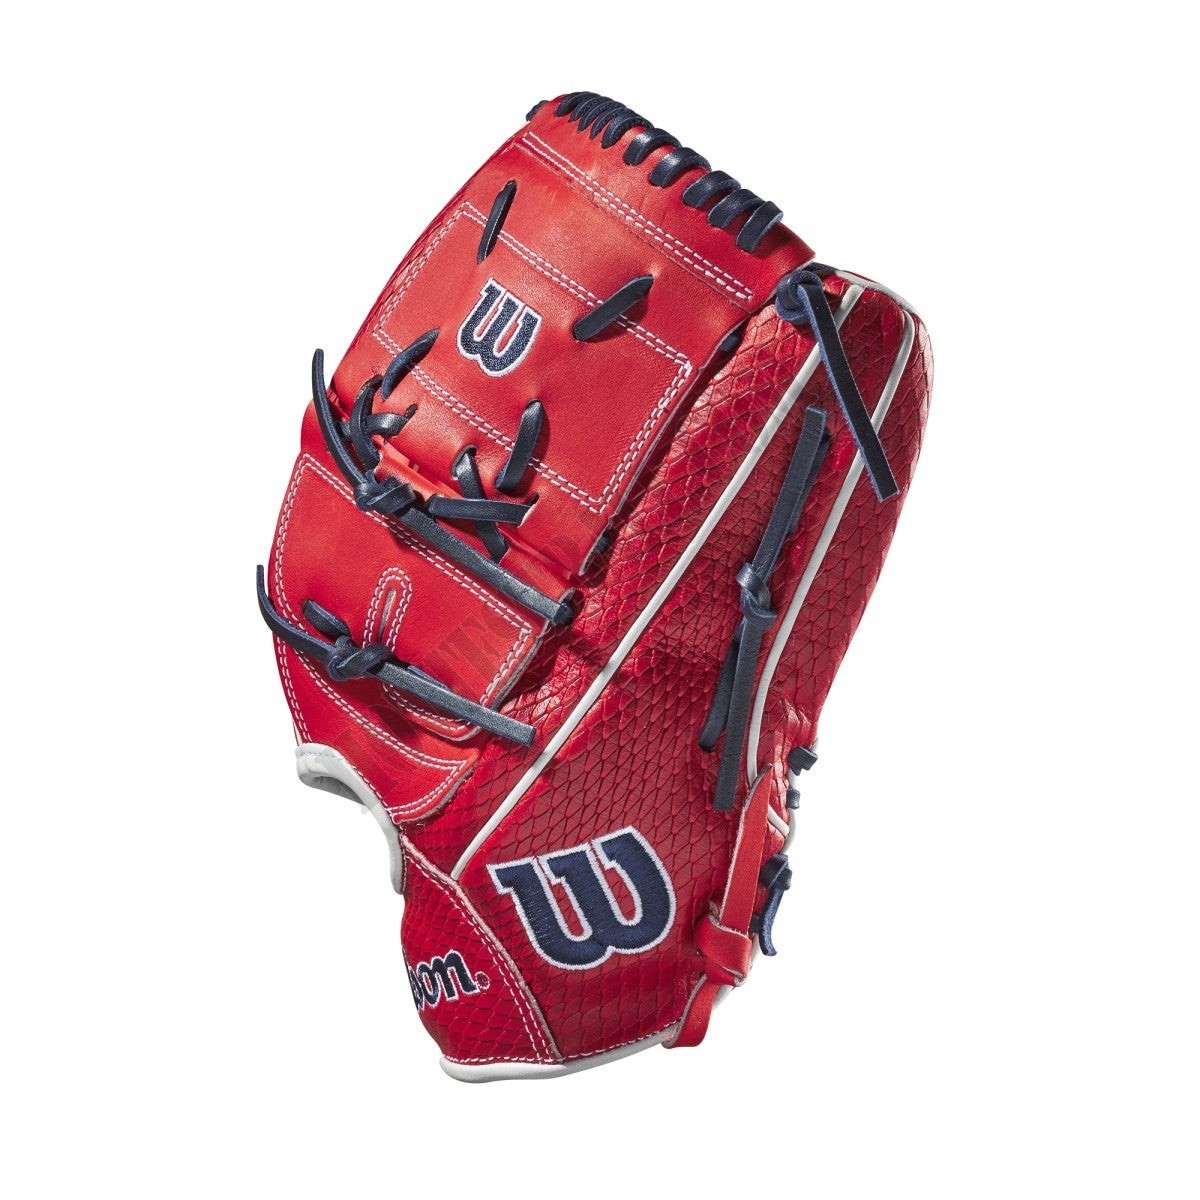 2021 A2000 B125 12.5" Carlos Carrasco Game Model Pitcher's Baseball Glove ● Wilson Promotions - -3